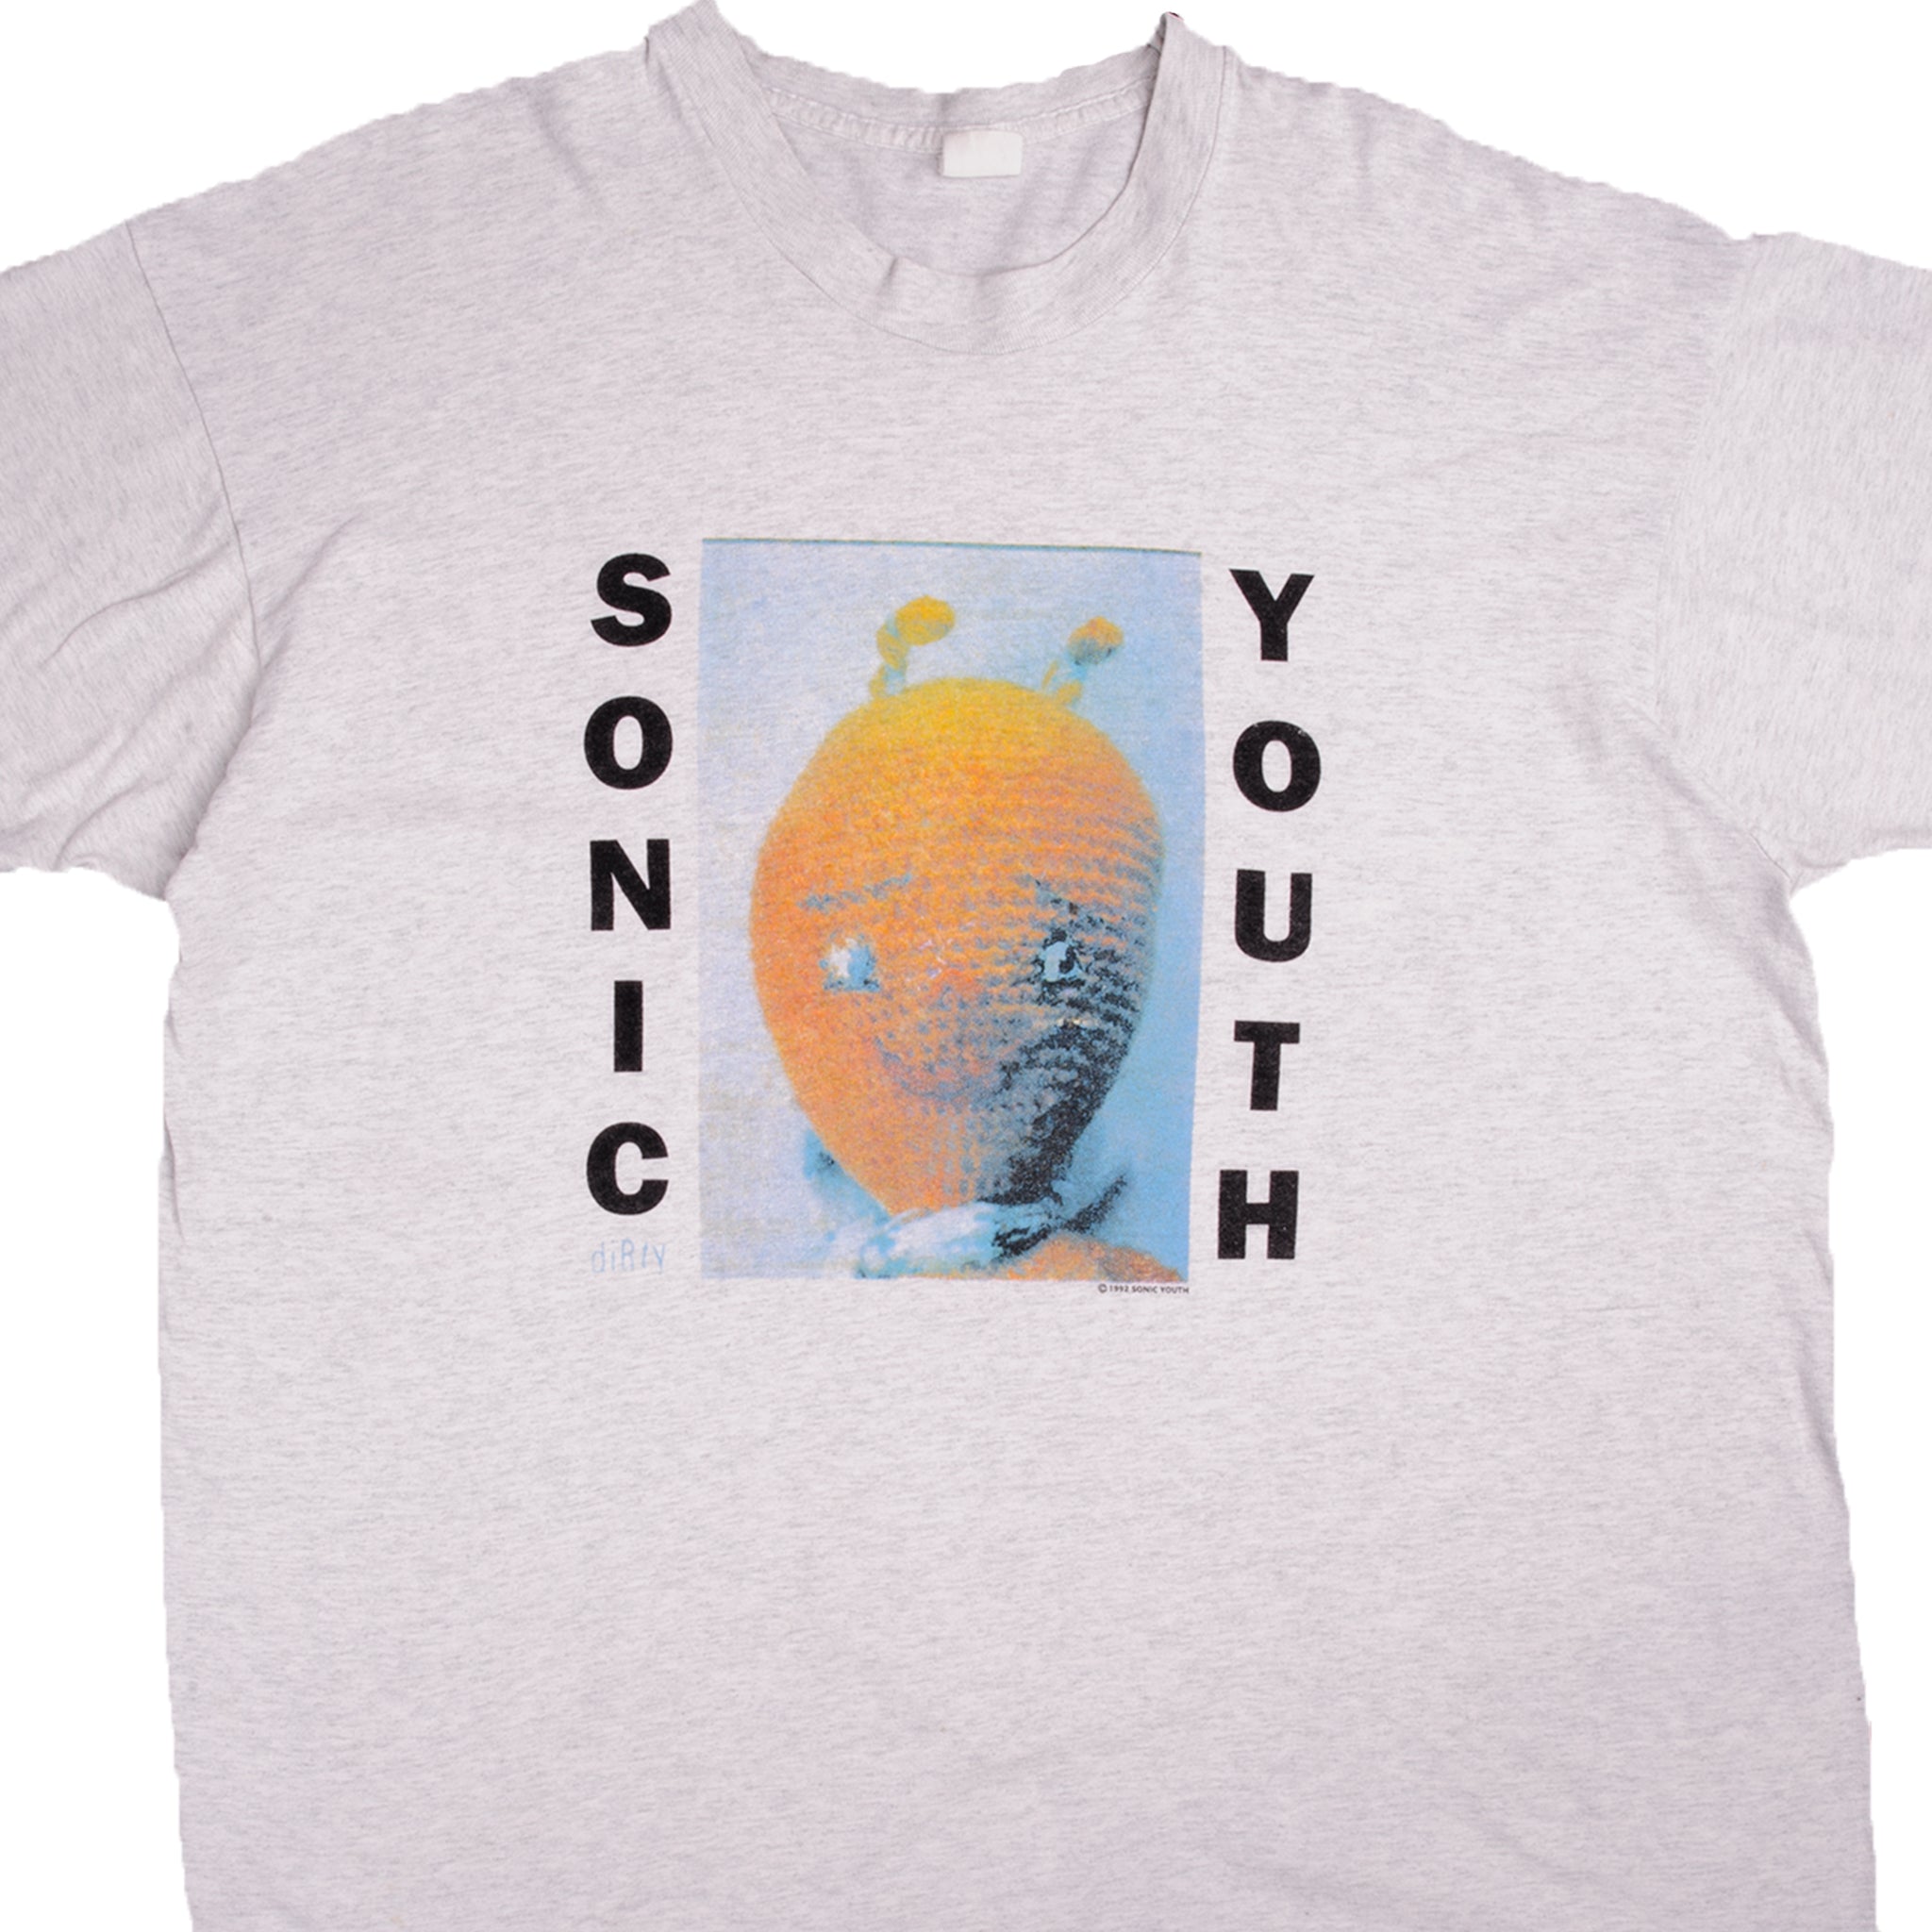 VINTAGE SONIC YOUTH DIRTY TEE SHIRT 1992 SIZE XXL